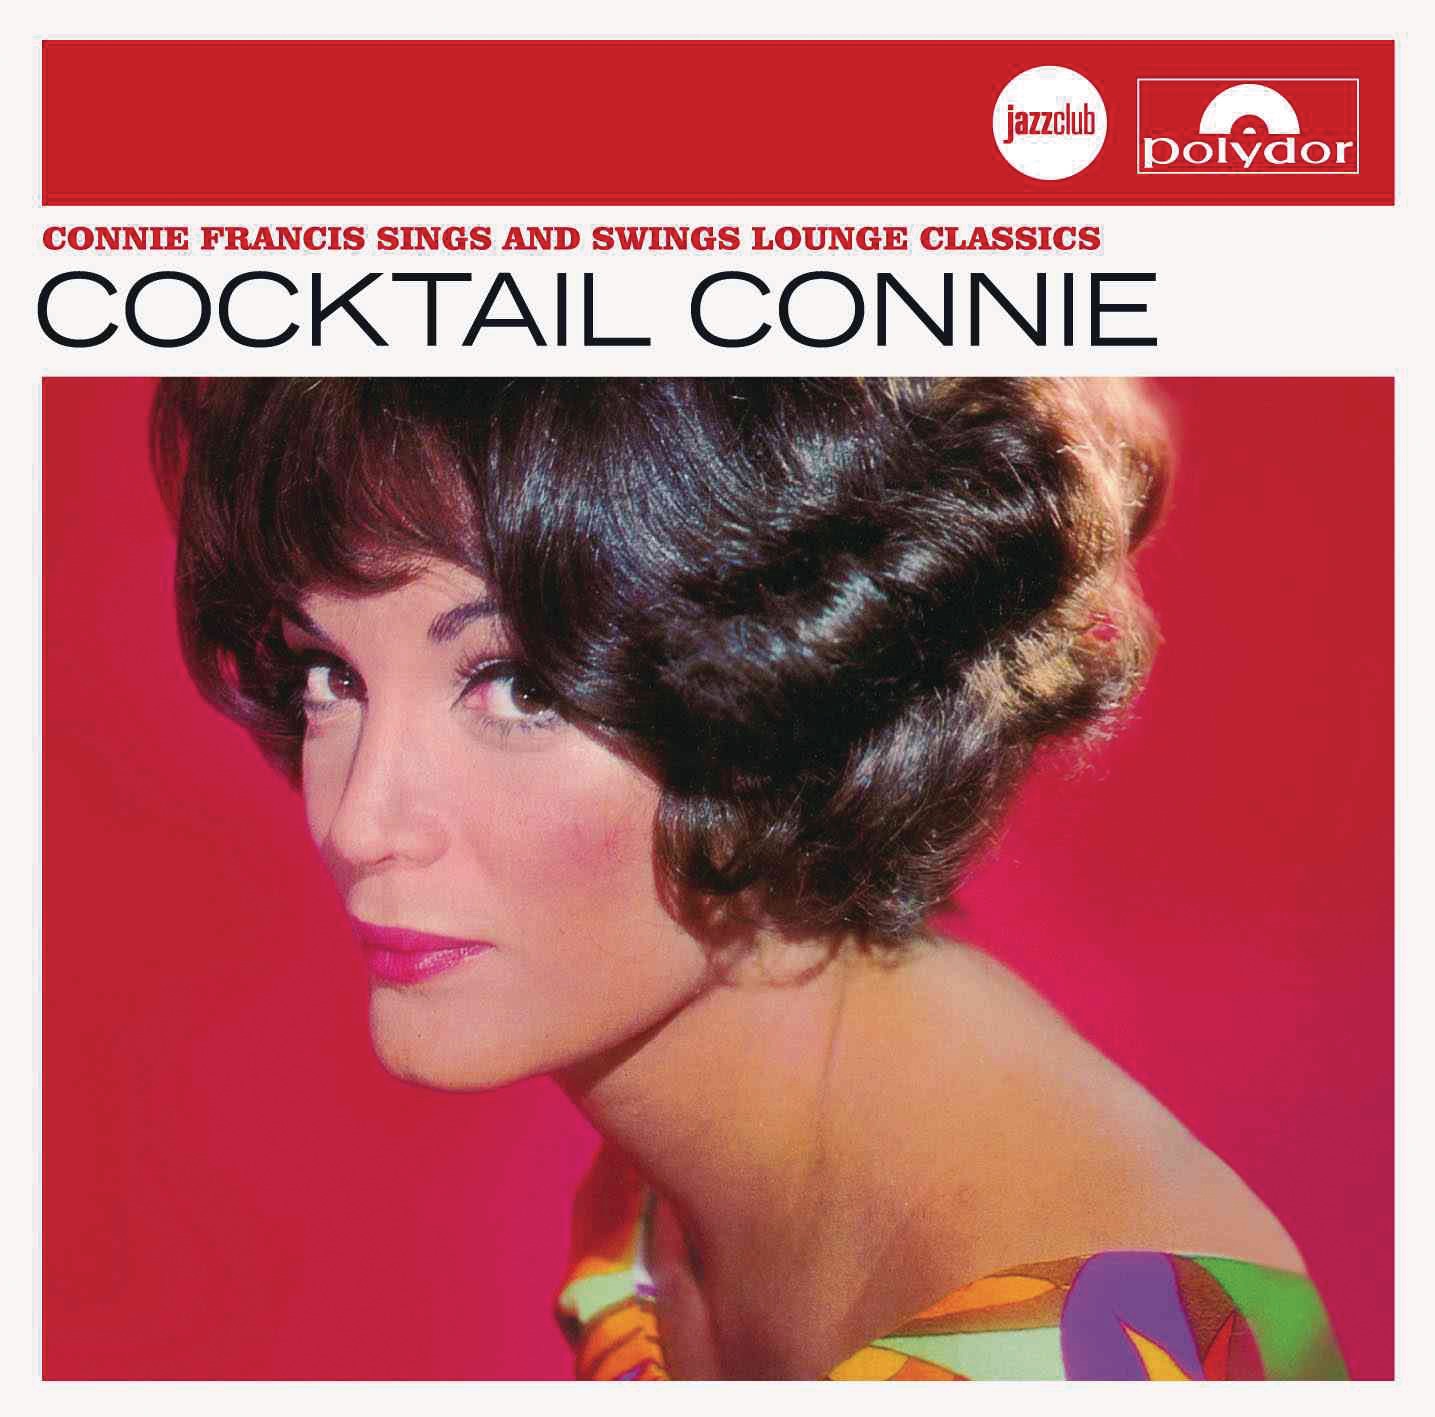 Art for The Second Time Around by Connie Francis